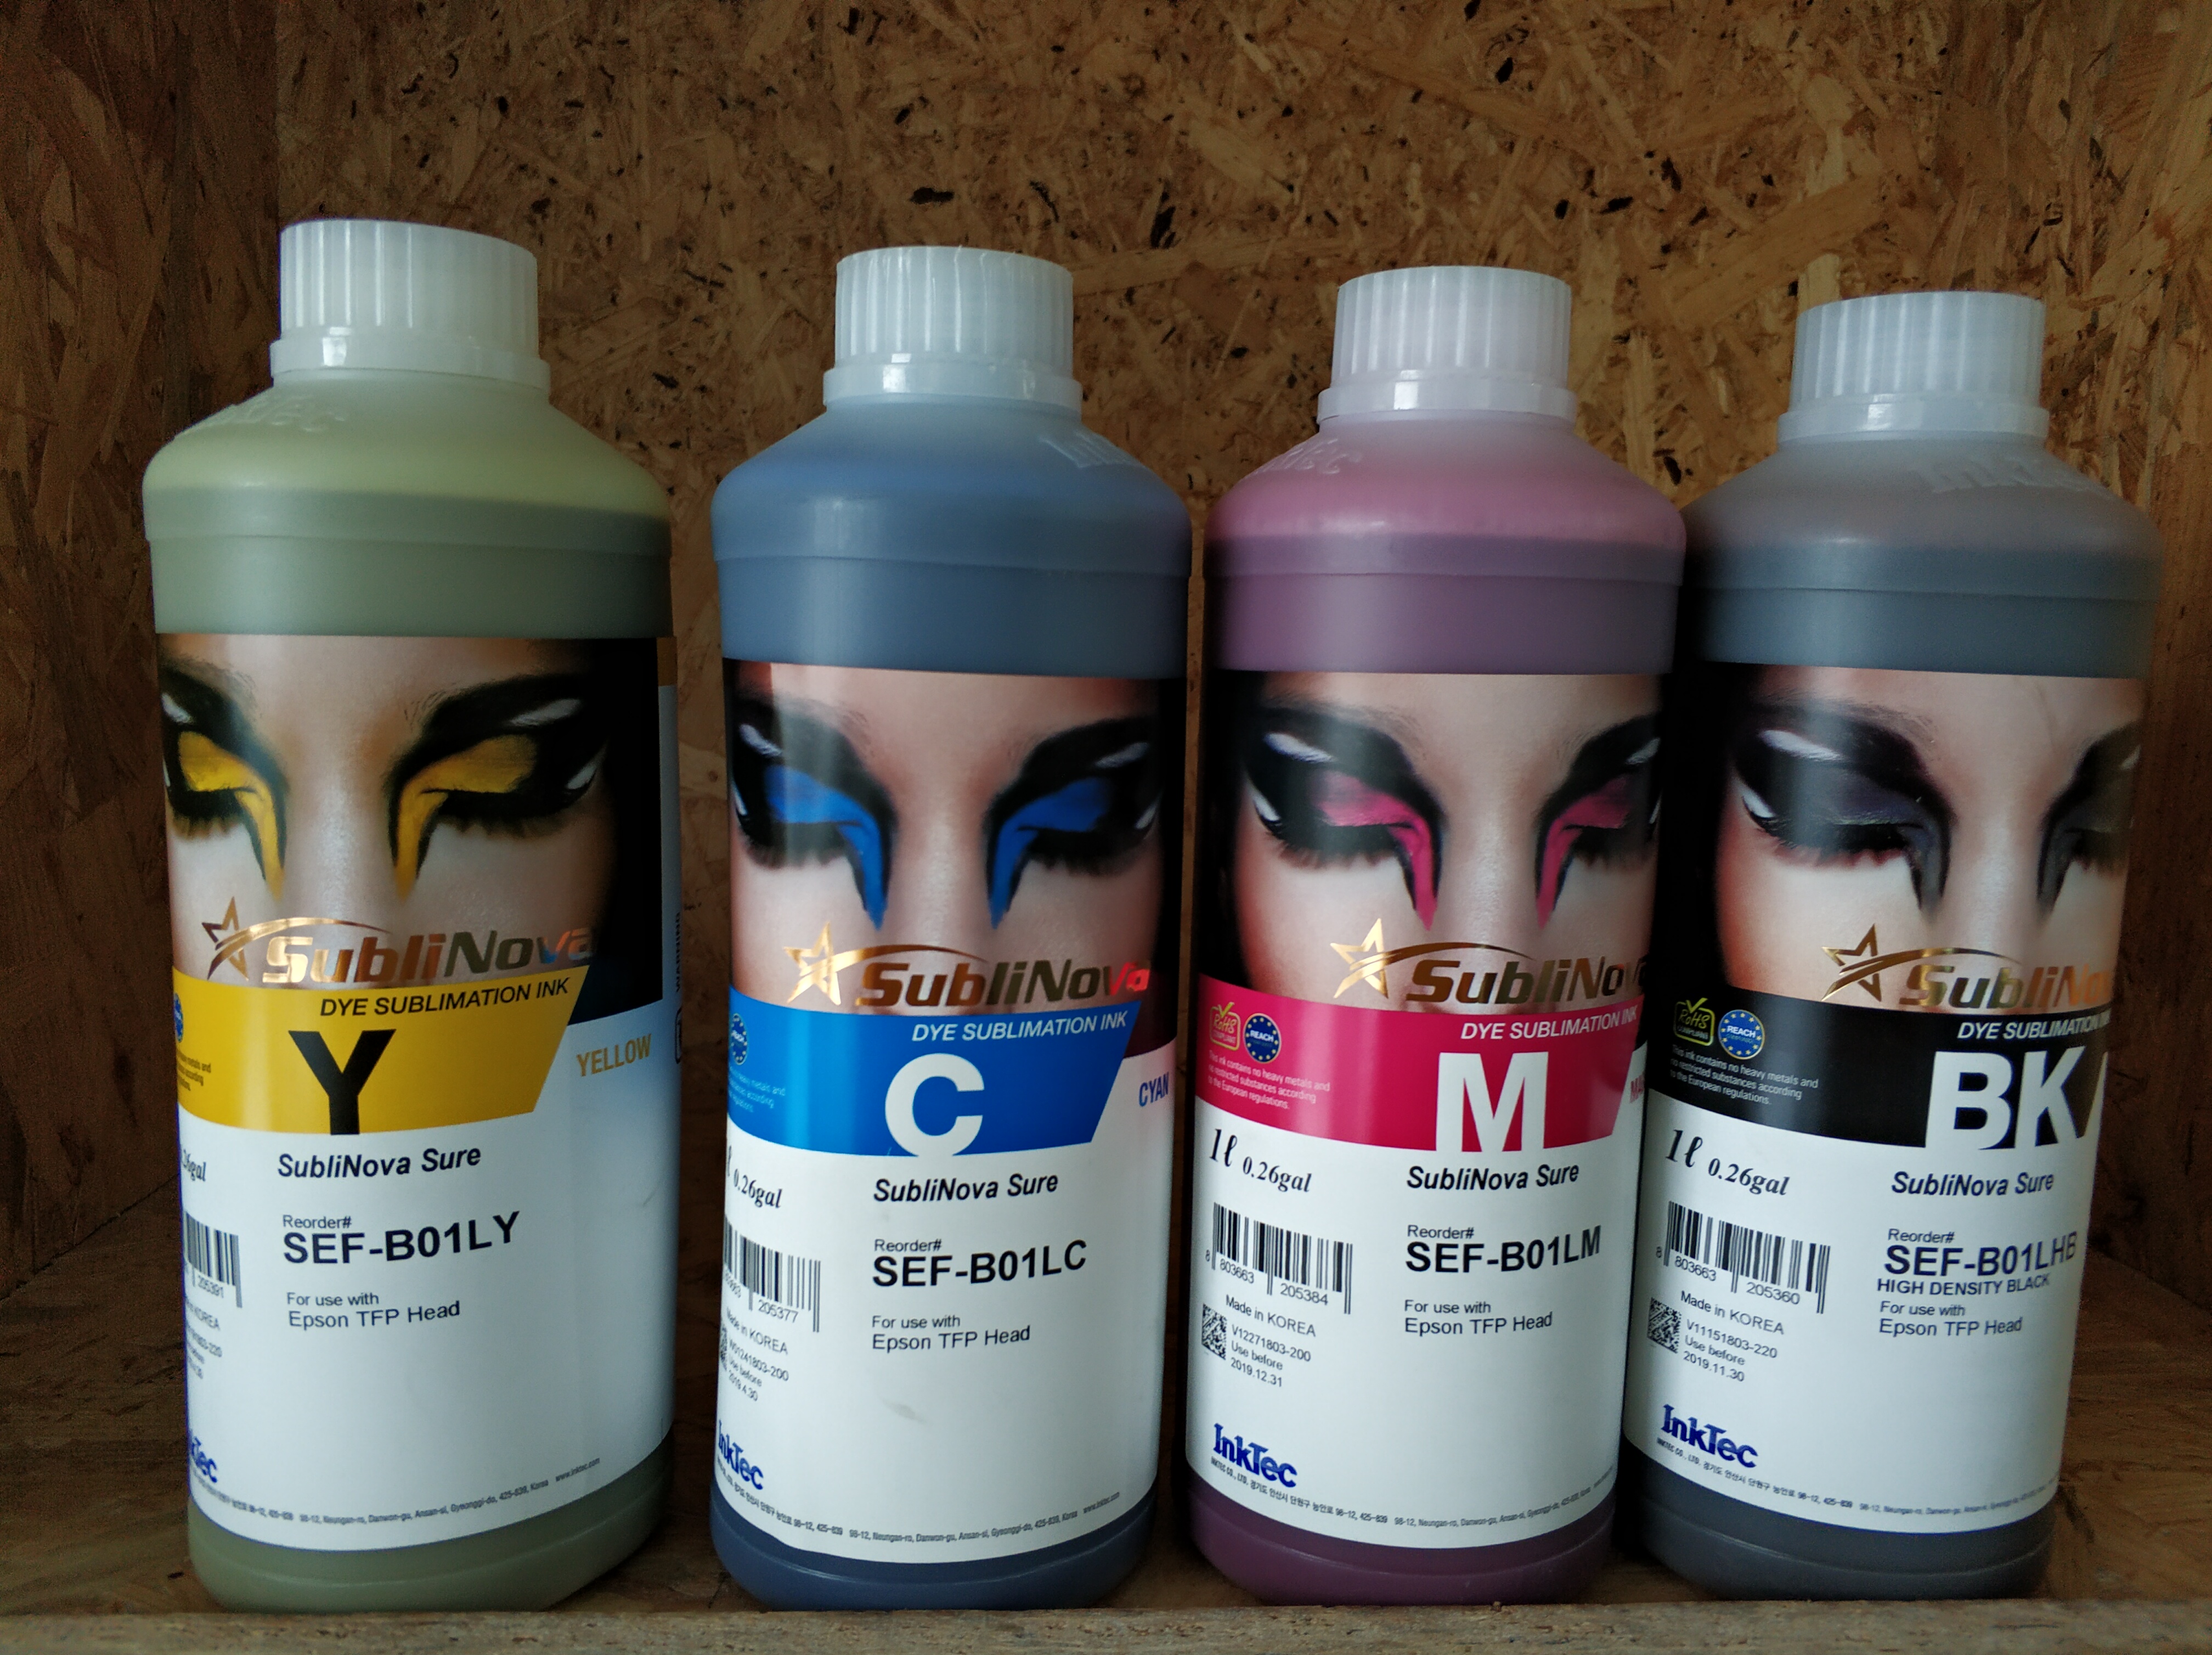 What’s the best sublimation ink for T-Shirts?